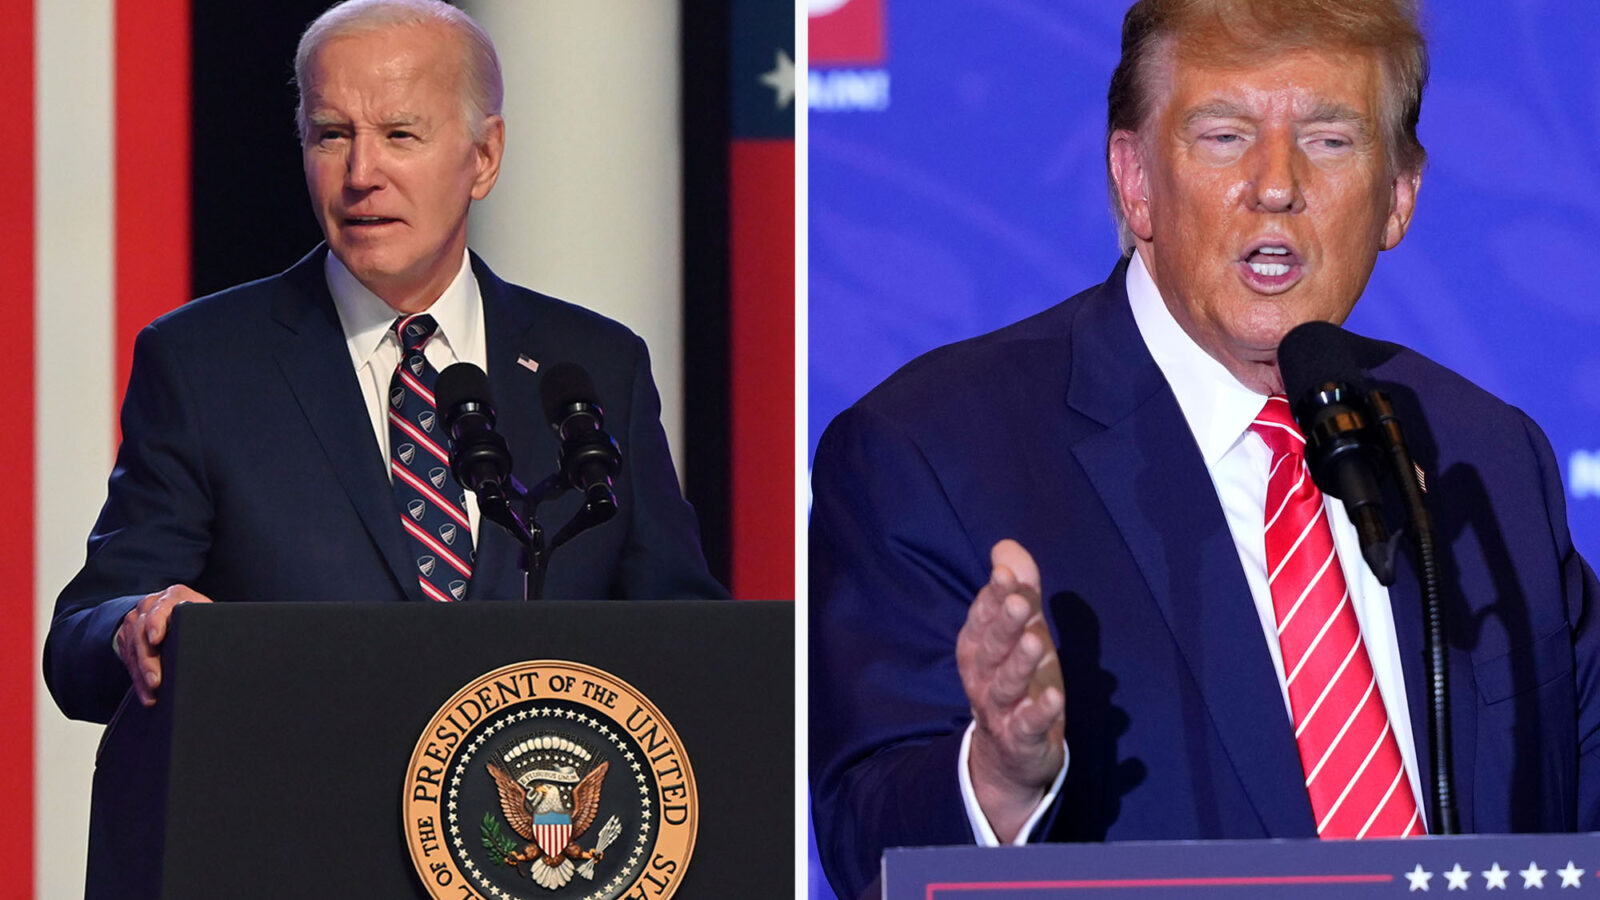 Are Verbal Flubs by Trump or Biden Signs of Cognitive Decline or